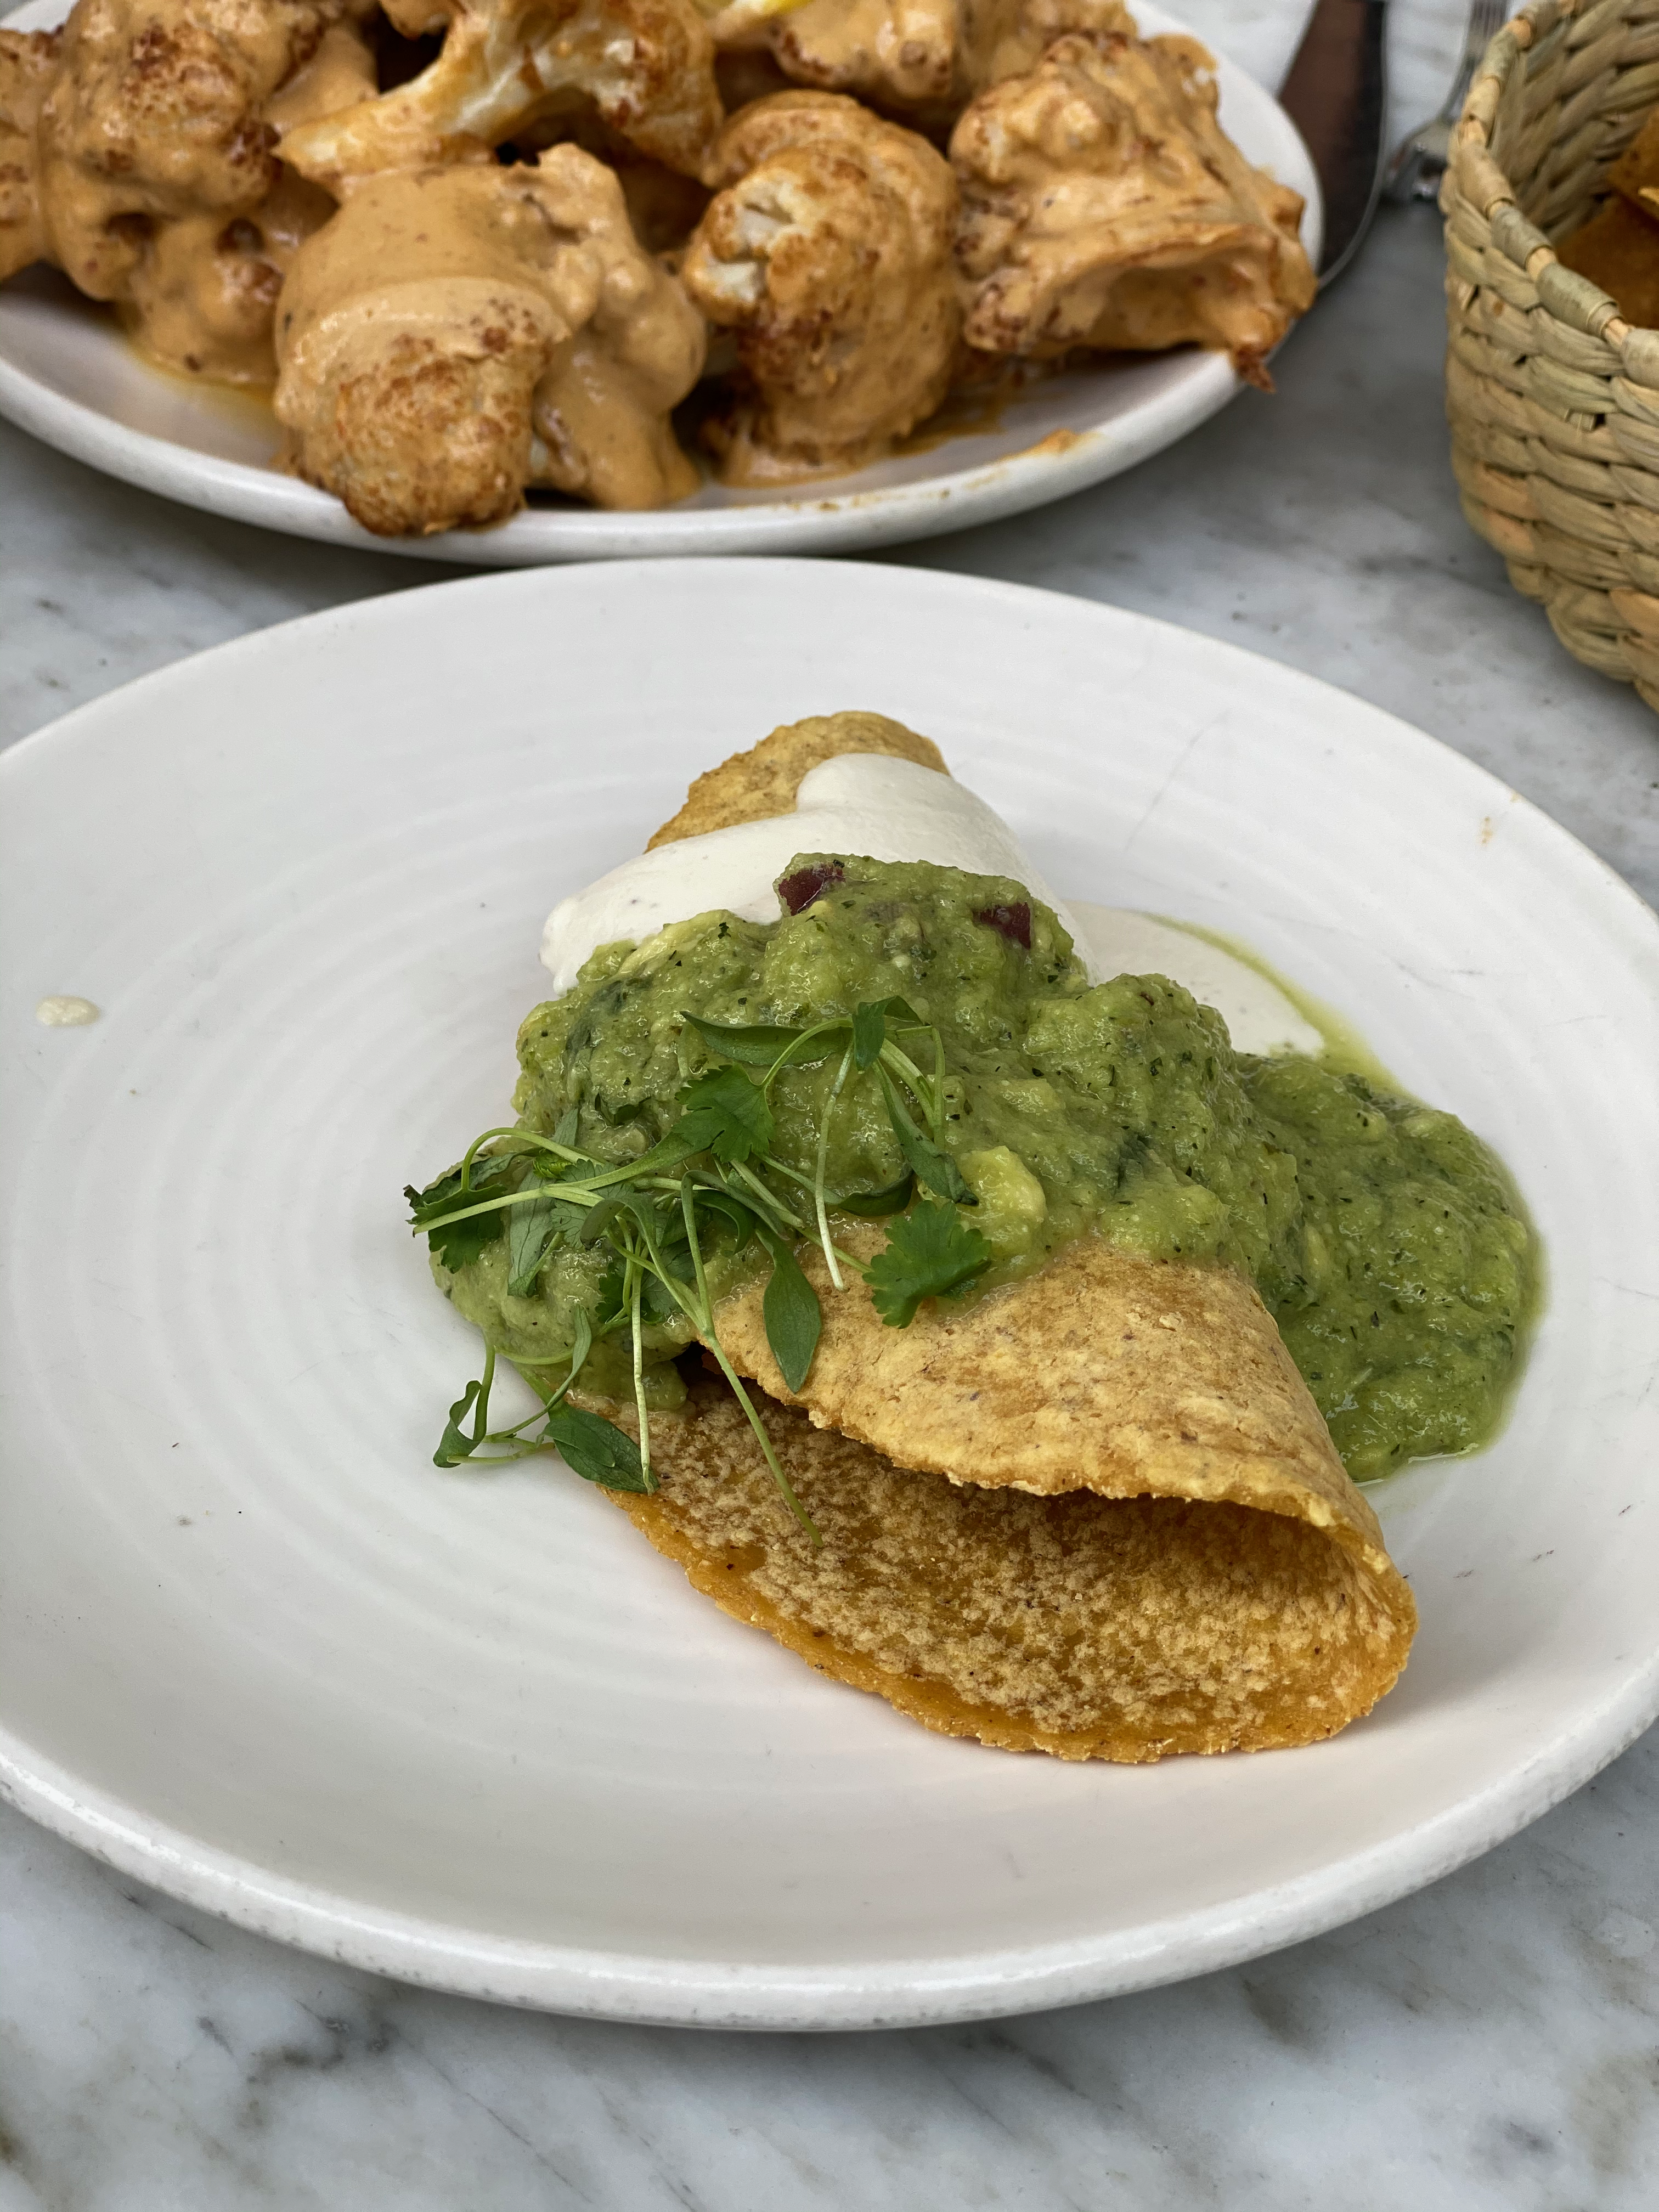 Plant-based Mexican food never tasted so good at Gracias Madre in West Hollywood